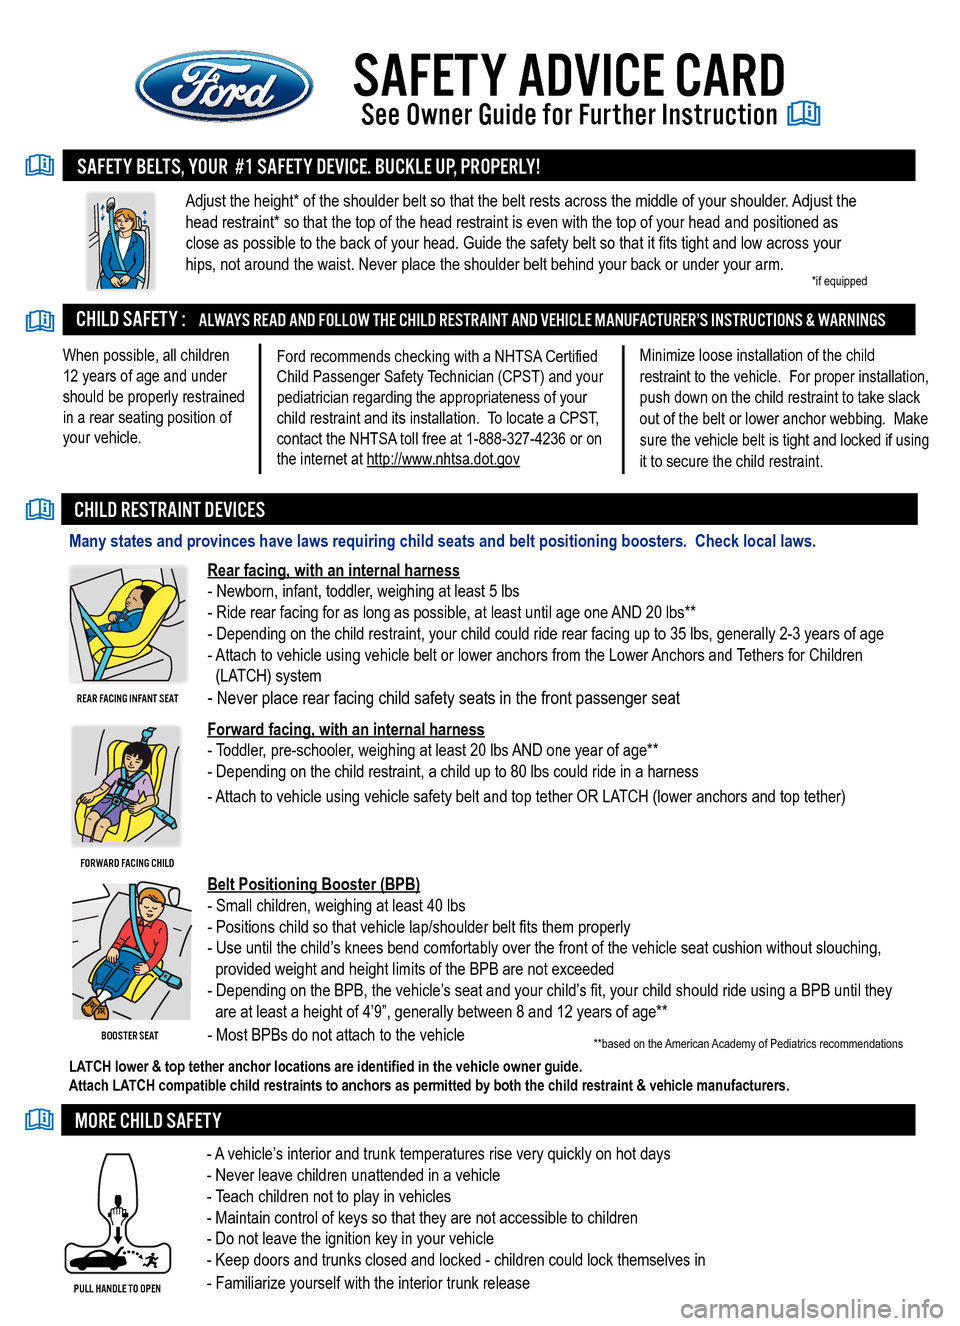 FORD SUPER DUTY 2010 2.G Safety Advice Card SAFETY ADVICE CARD
See Owner Guide for Further Instruction
Adjust the height* of the shoulder belt so that the belt rests across th\
e middle of your shoulder. Adjust the 
head restraint* so that the 